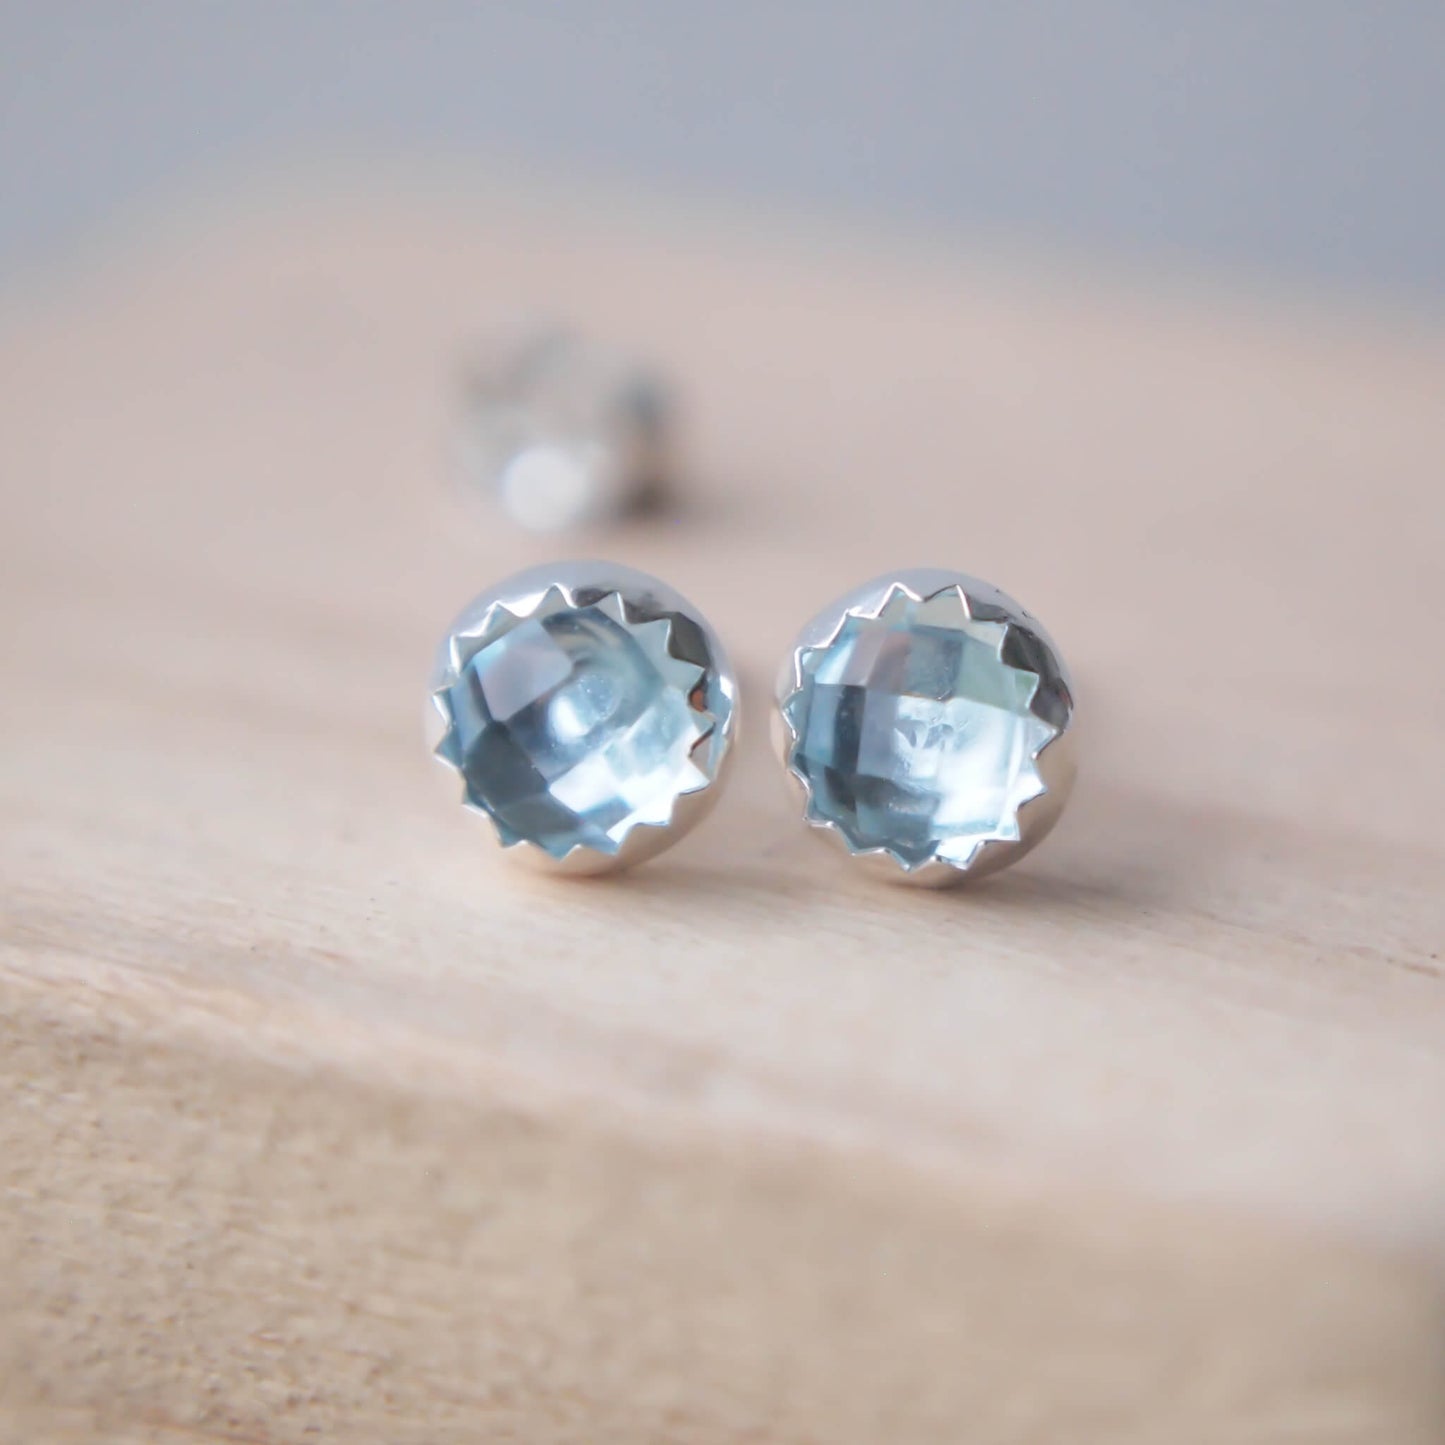 March Birthstone Blue Topaz Earrings in a pale blue facet cut gemstone with a simple silver surround with a jagged edge. Handmade in Scotland by maram jewellery